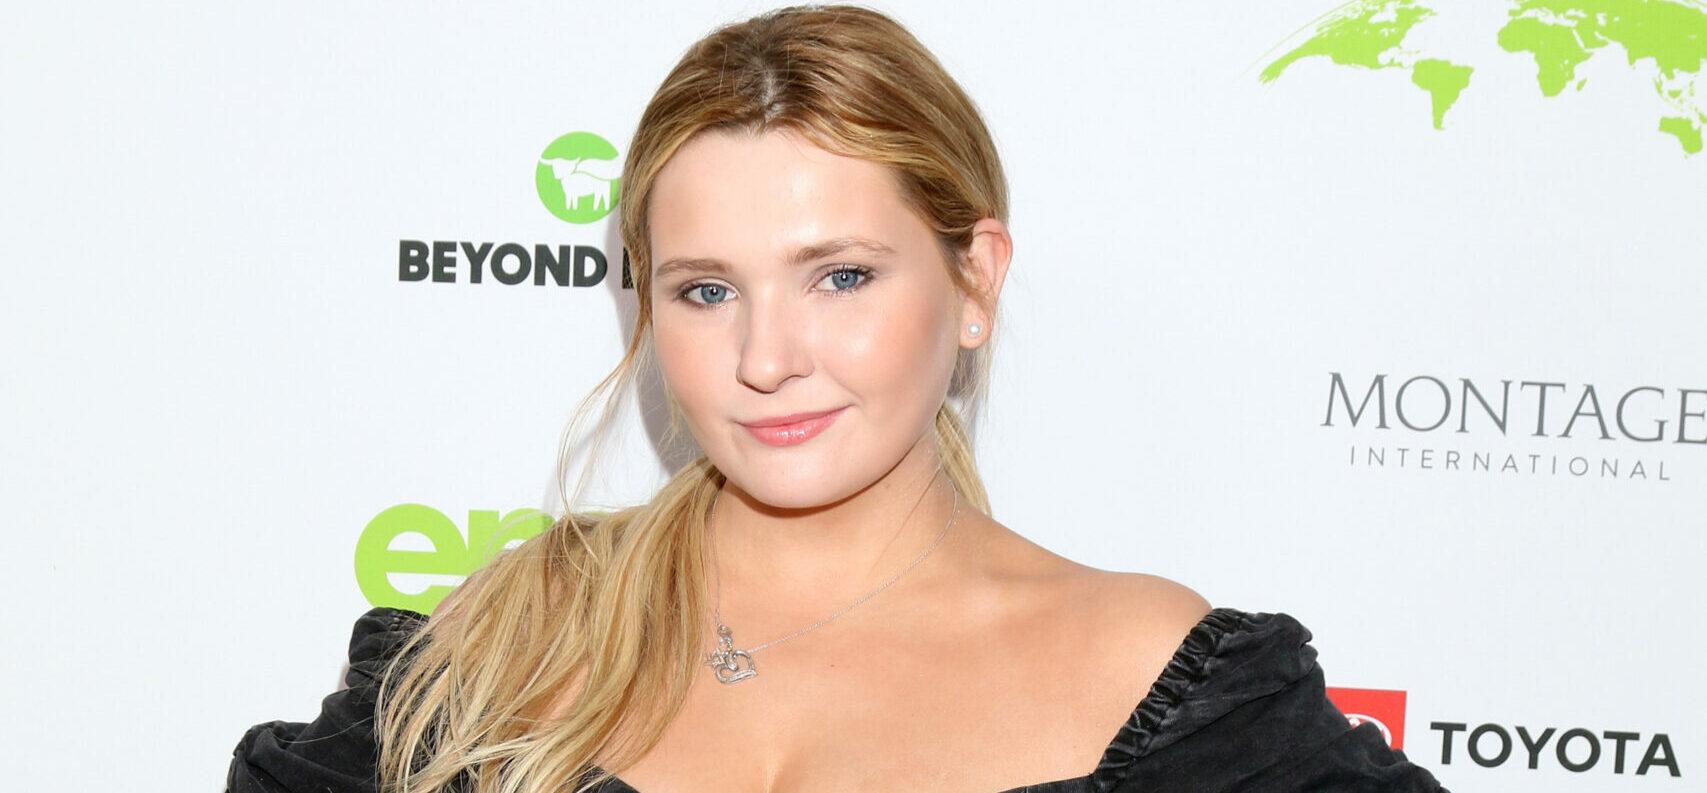 Abigail Breslin Waves Goodbye To Social Media After COVID Mask Feud